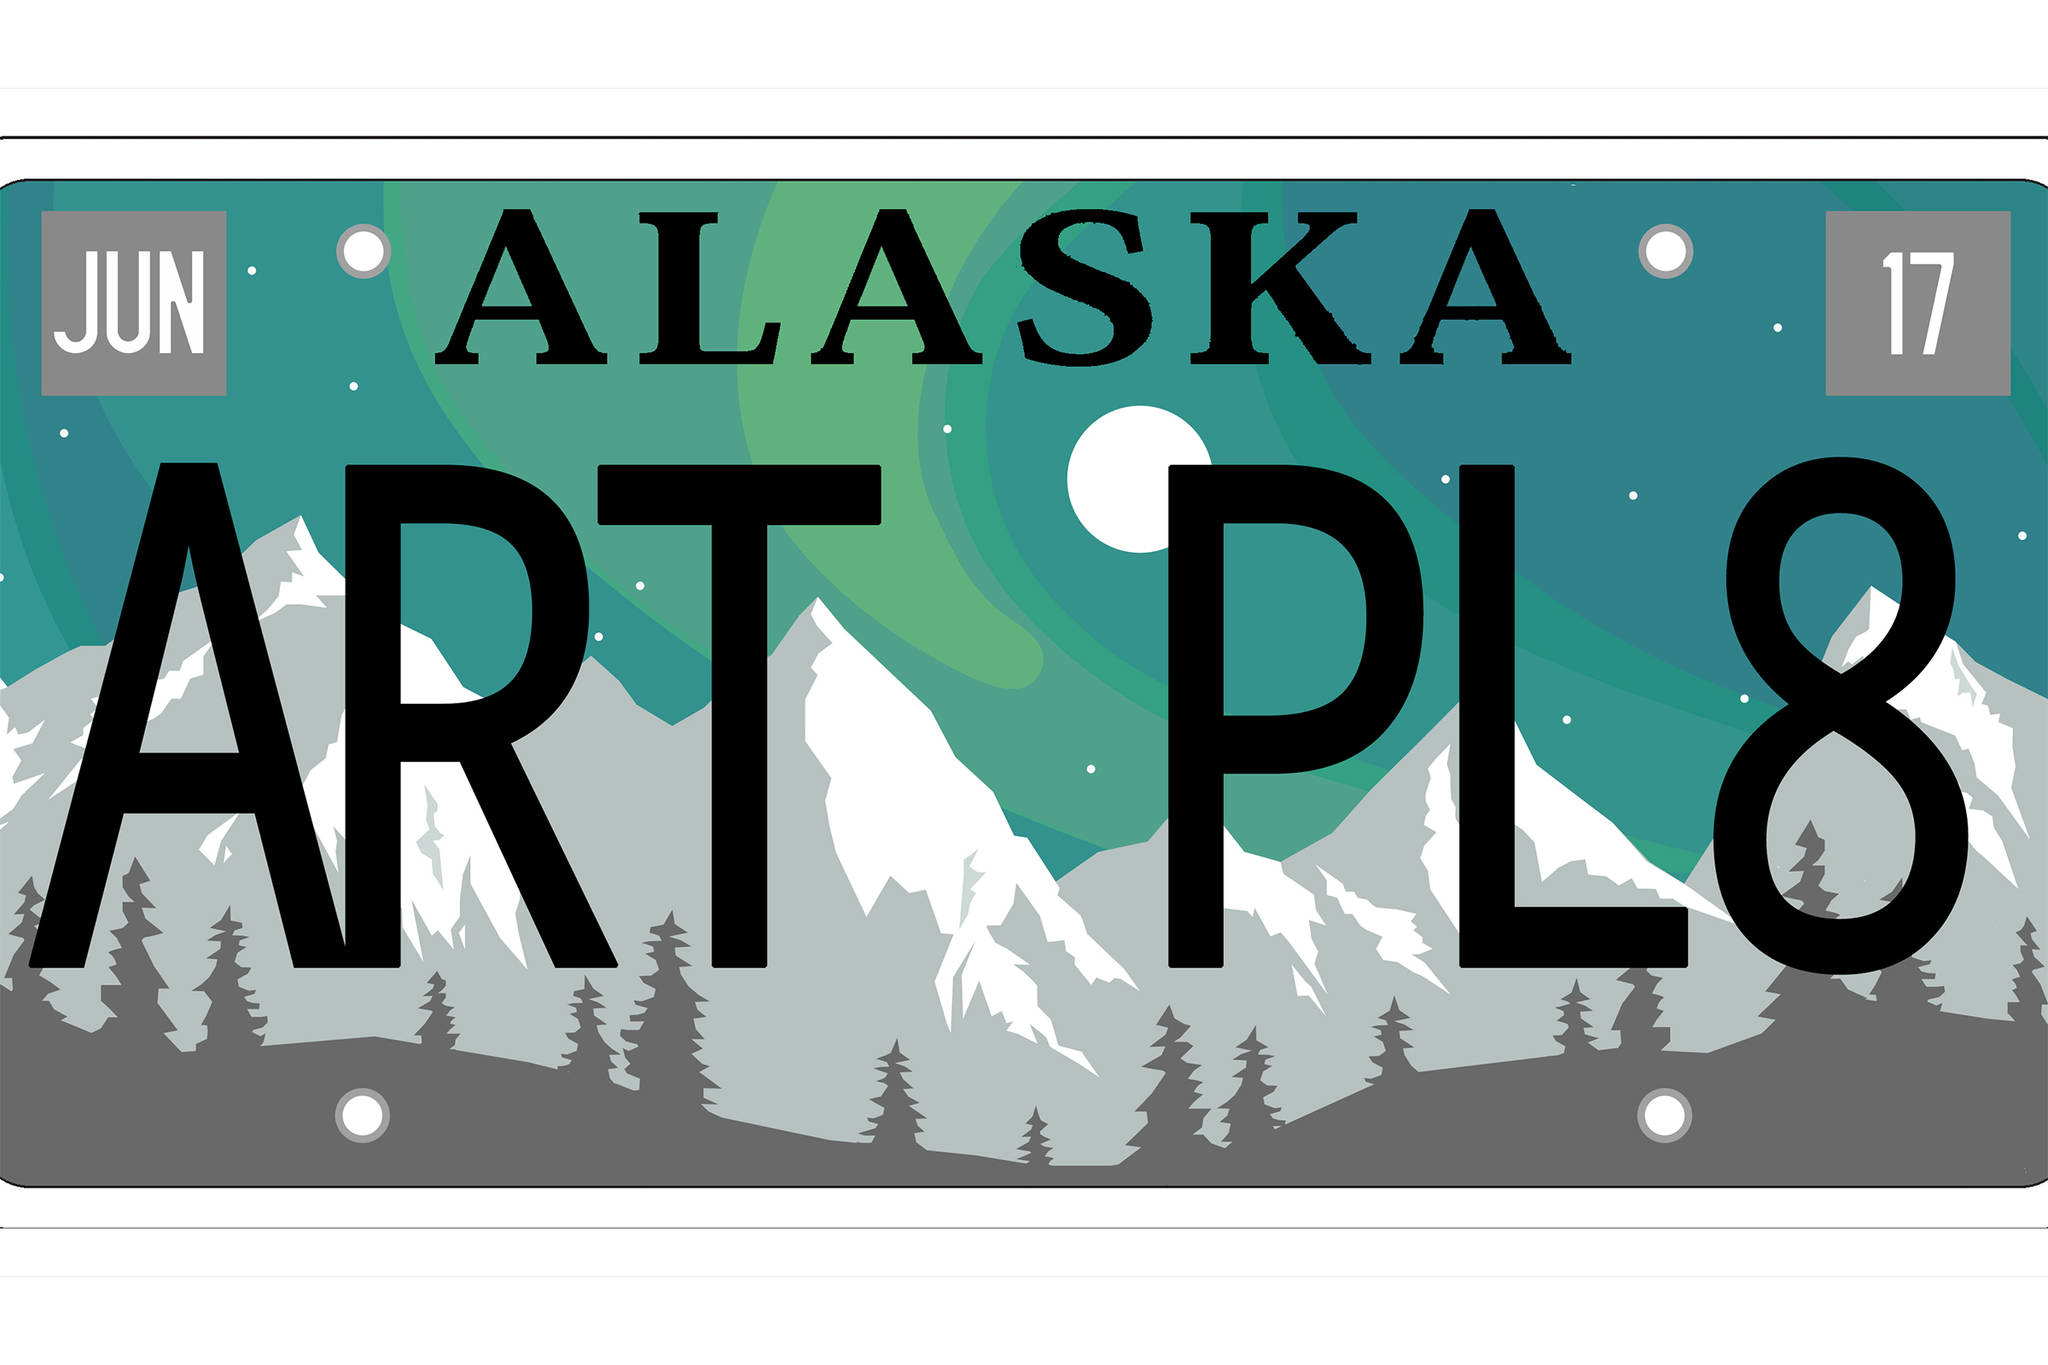 This license plate designed by Anita Laulainen was the winning design in the 2017 Alaska Artistic License competition. A surcharge could be attached to plates like this one if a bill heard by the Senate Education Committee Thursday becomes law. The additional charge could be used to provide funding for the Alaska State Council on the Arts. (Courtesy Photo | Alaska State Council on the Arts)